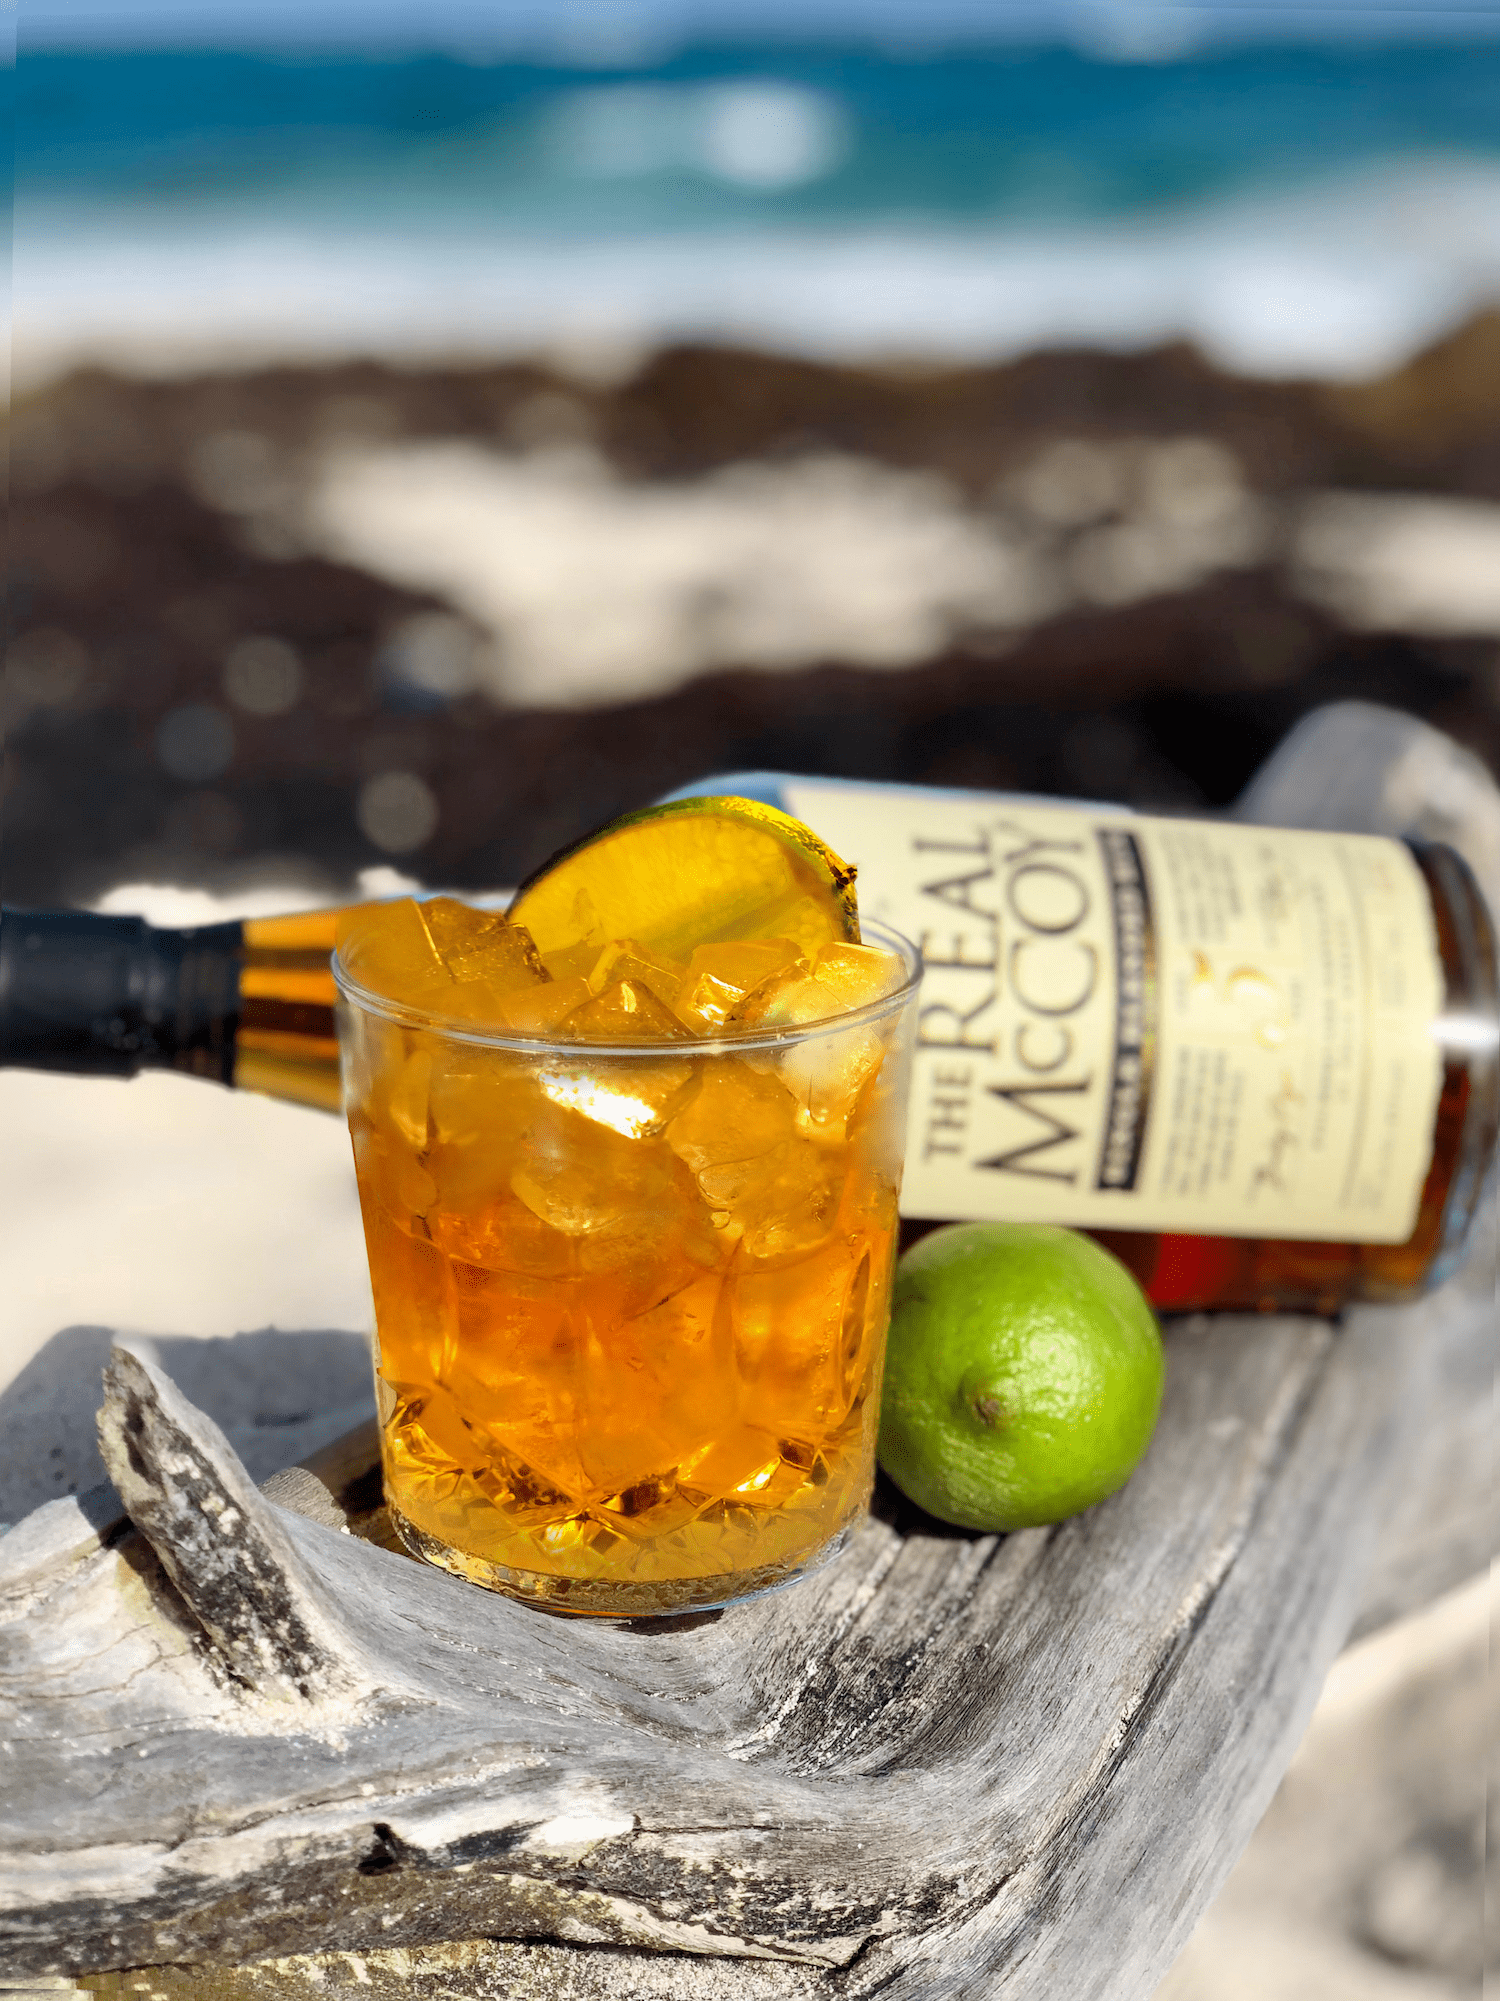 Image of a Corn n Oil cocktail in rocks glass sitting atop a piece of driftwood on the beach in Barbados with a bottle of Real McCoy 5 year aged rum in the background.